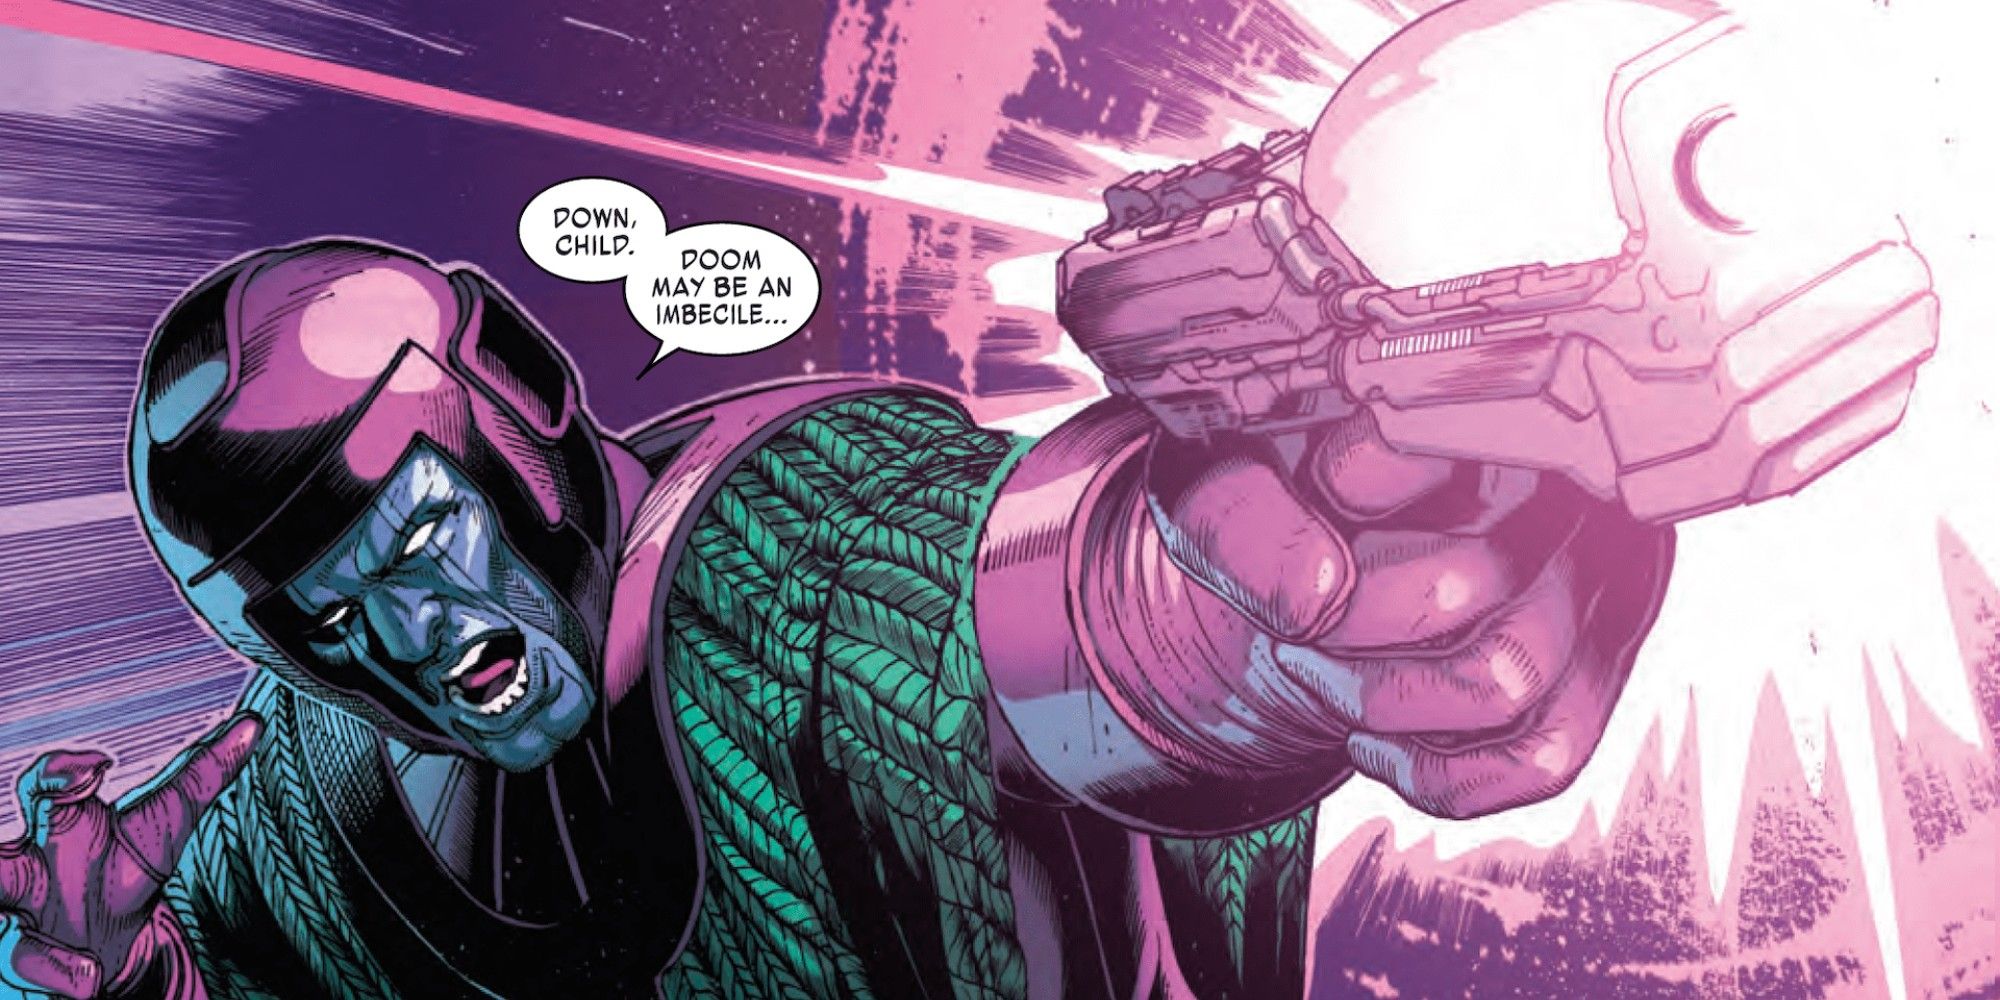 kang the conqueror with his weapon